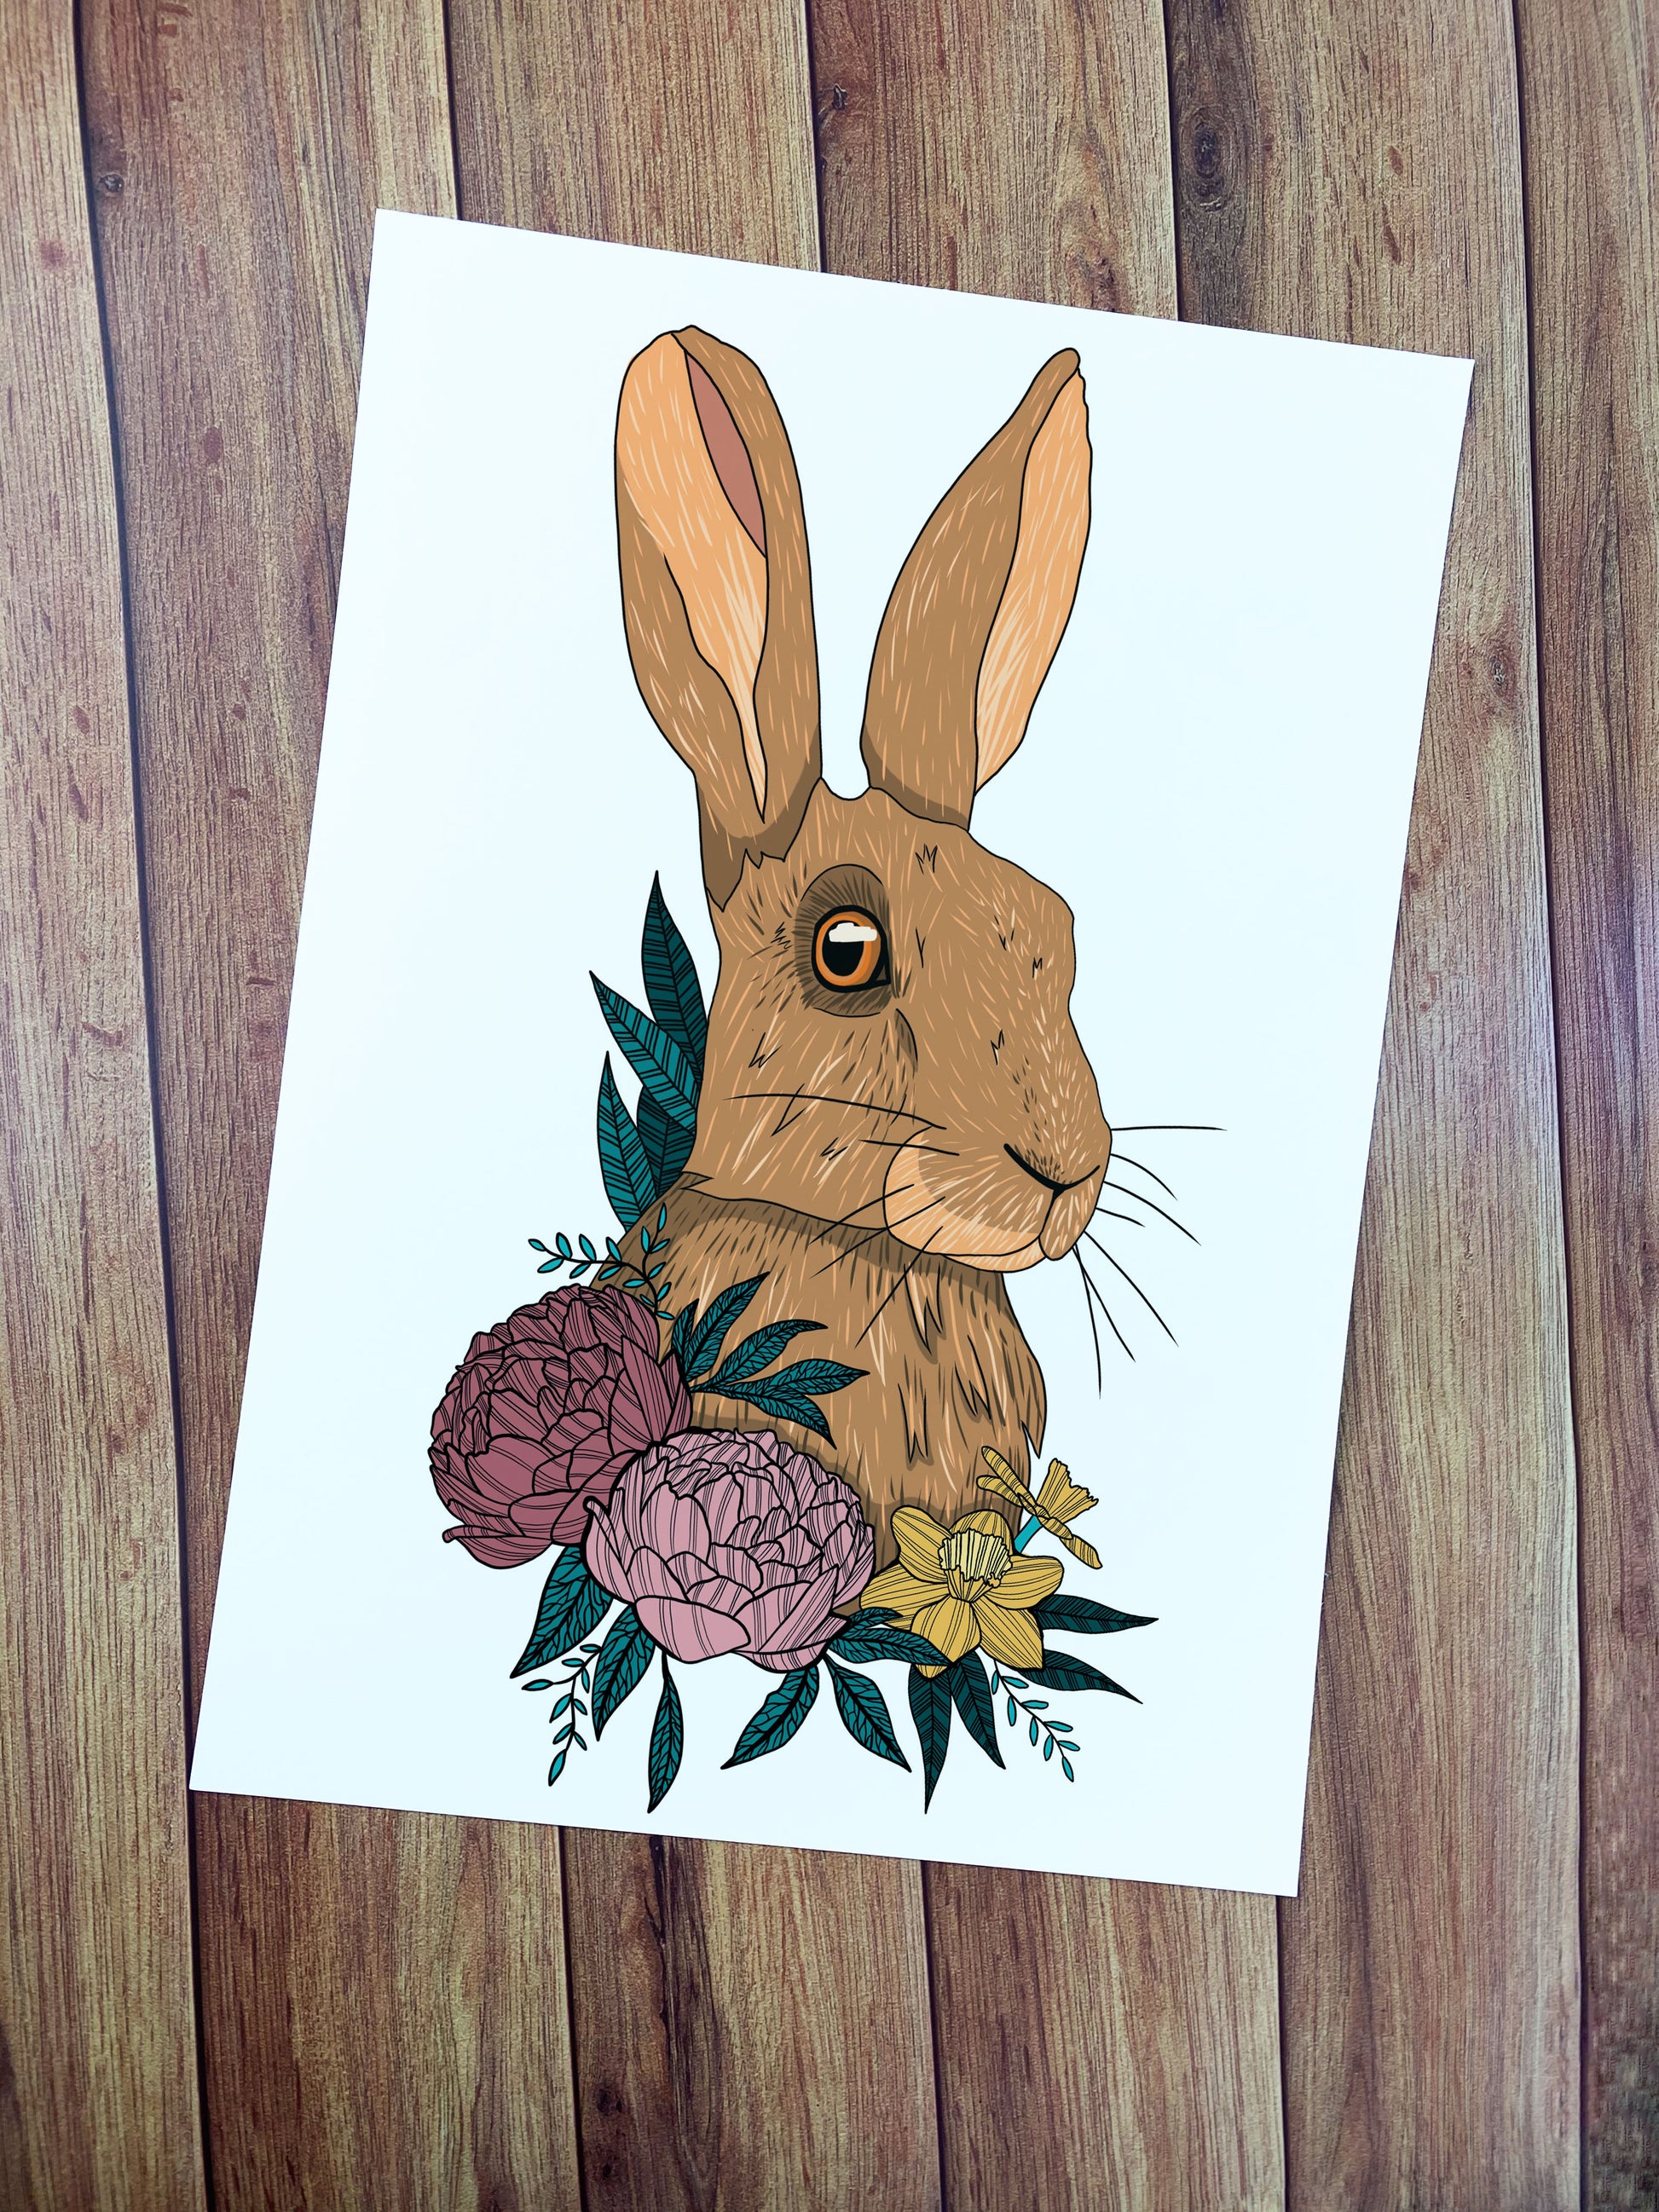 The hare print here shows some yellow daffodils and large pink flowers at the base of a hare's portrait, illustrated in a digital style on a white background. The print then sits on a wooden background.